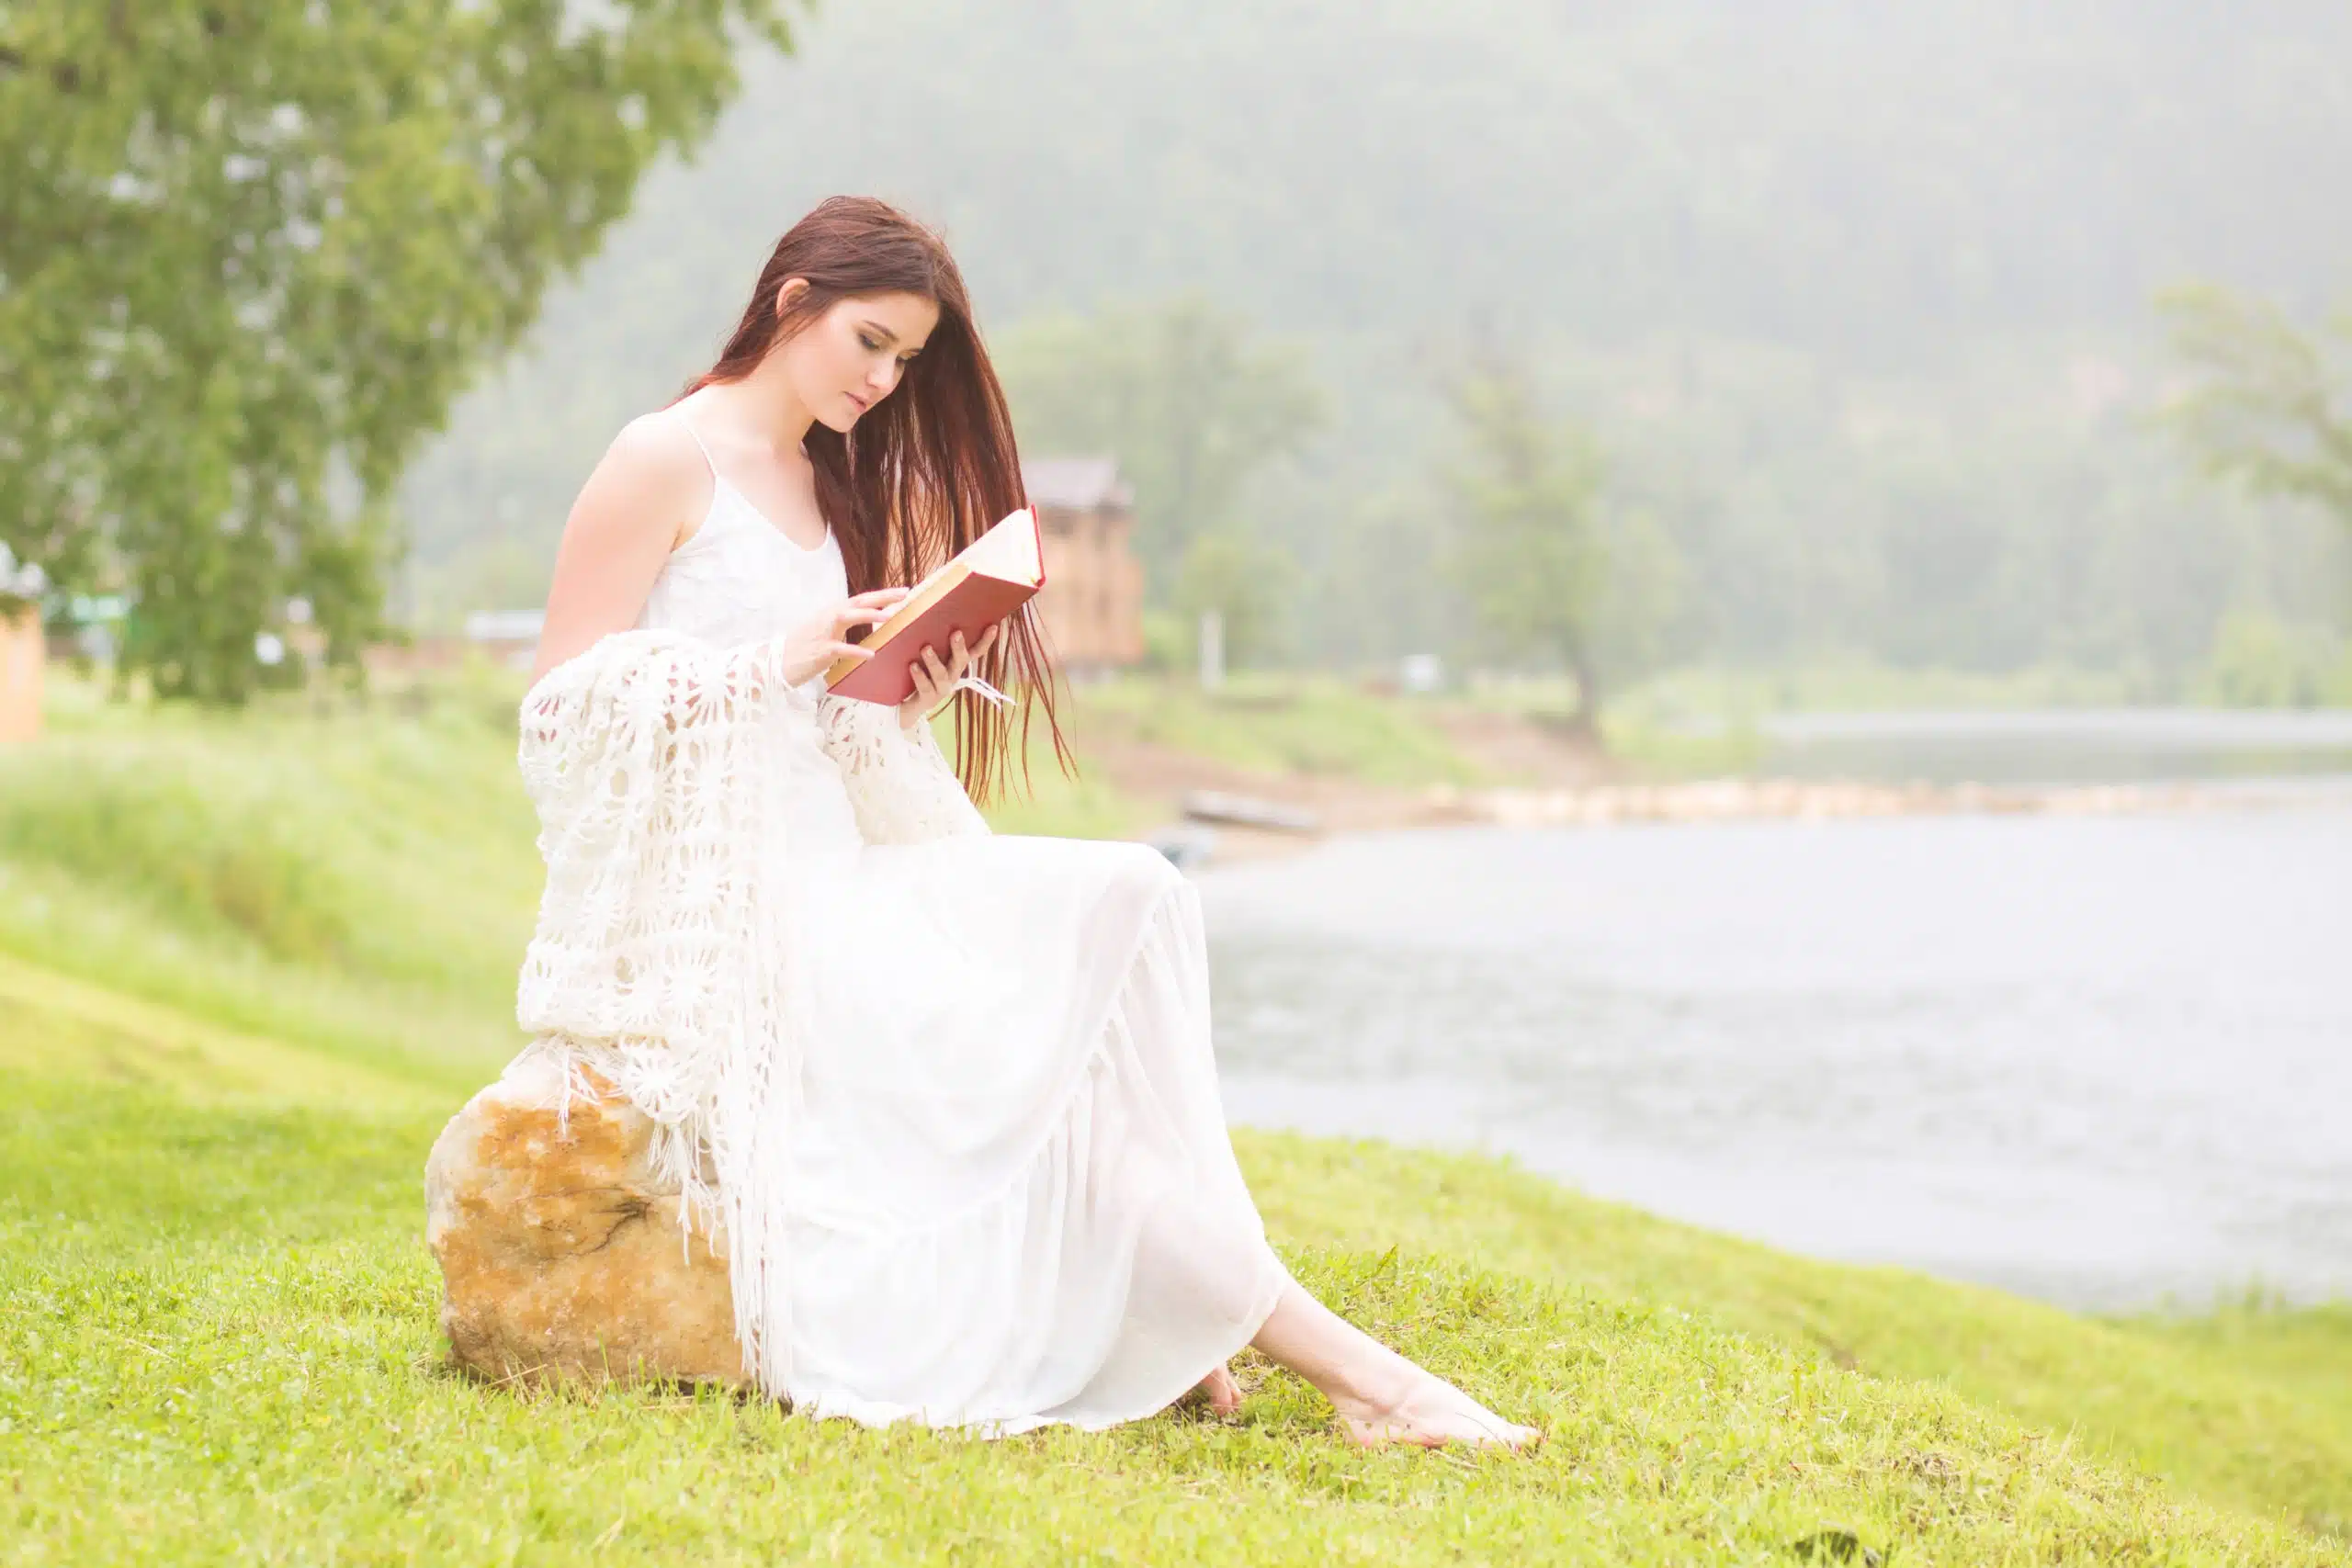 Woman in white dress reading a book by the lake.